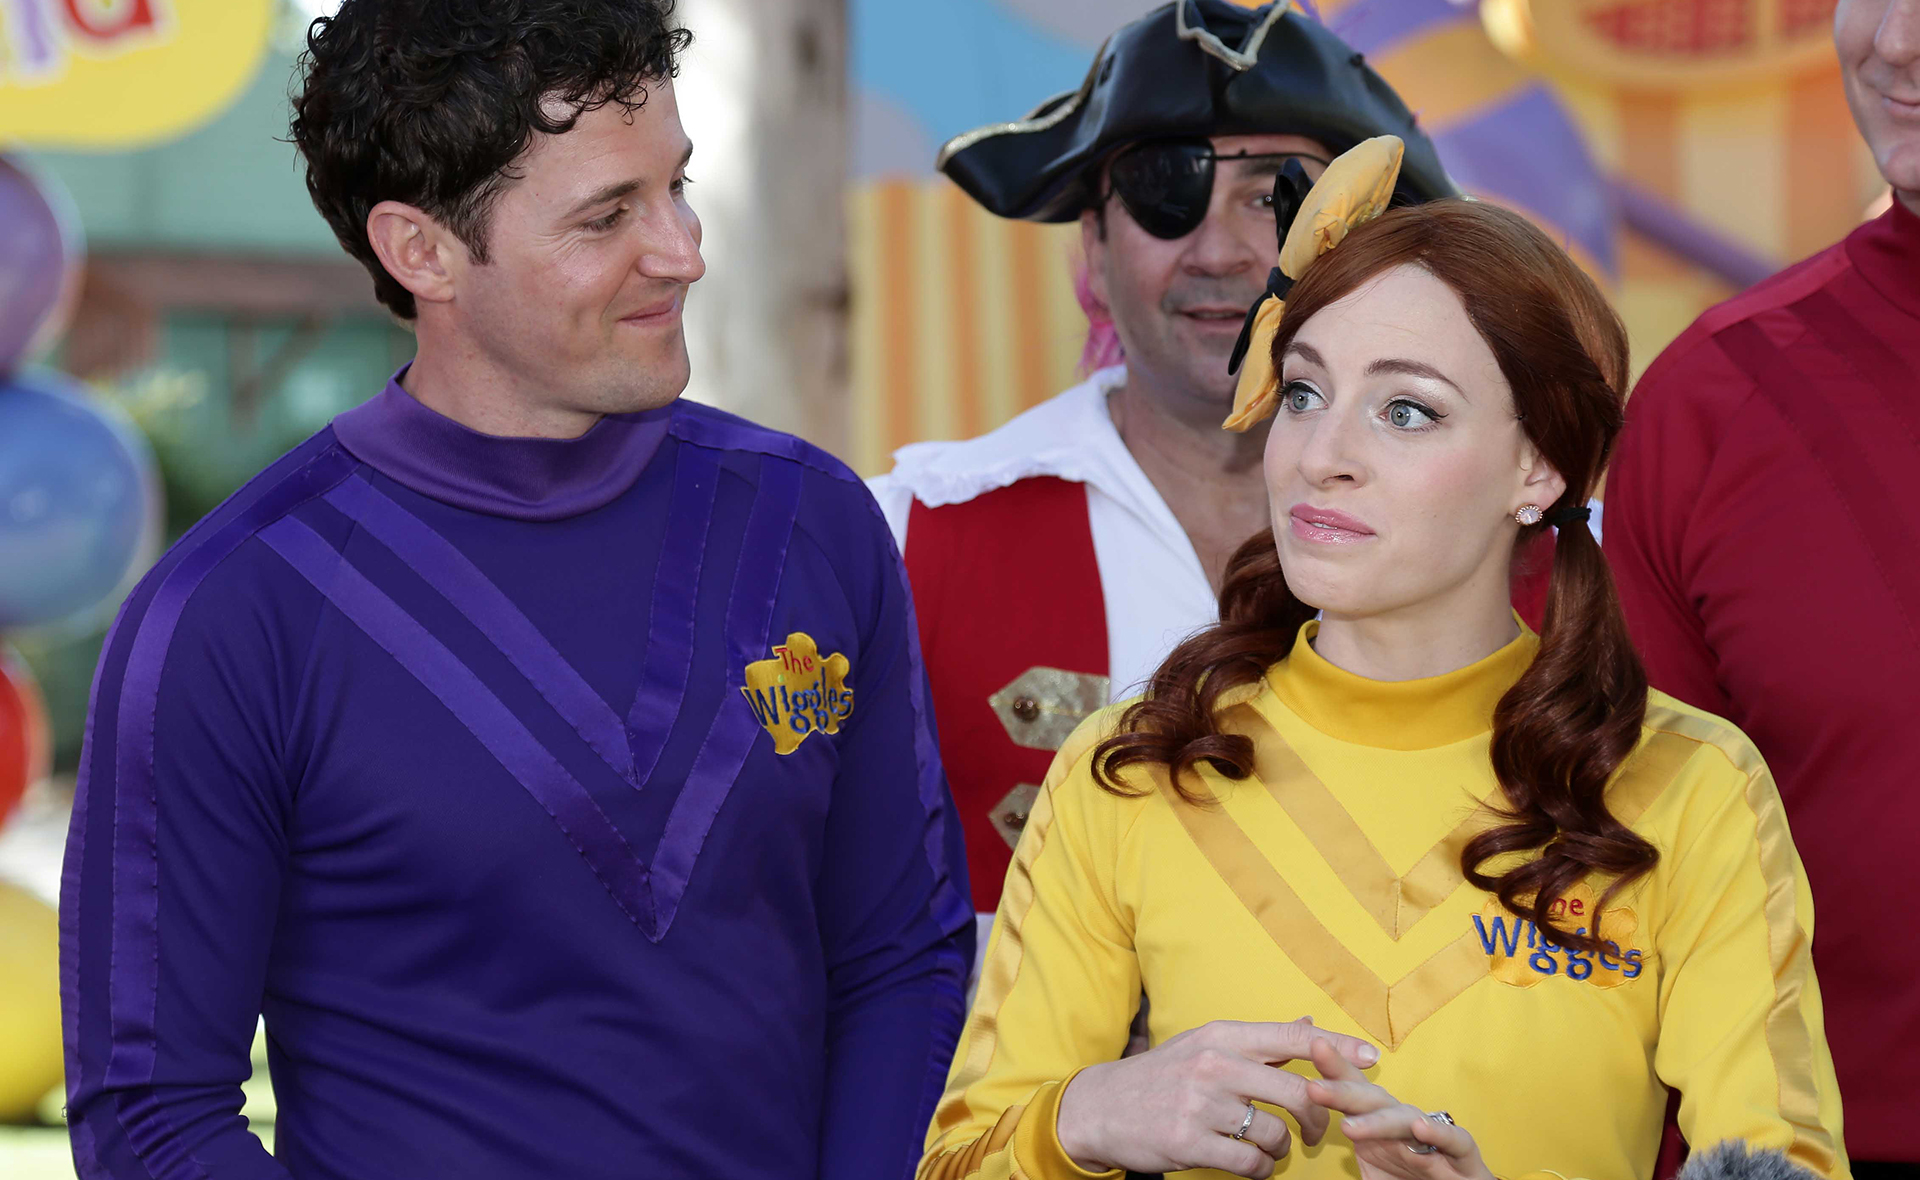 EXCLUSIVE: Why Emma Watkins left The Wiggles: “It’s difficult to move on when you’re spending so much time with your ex”